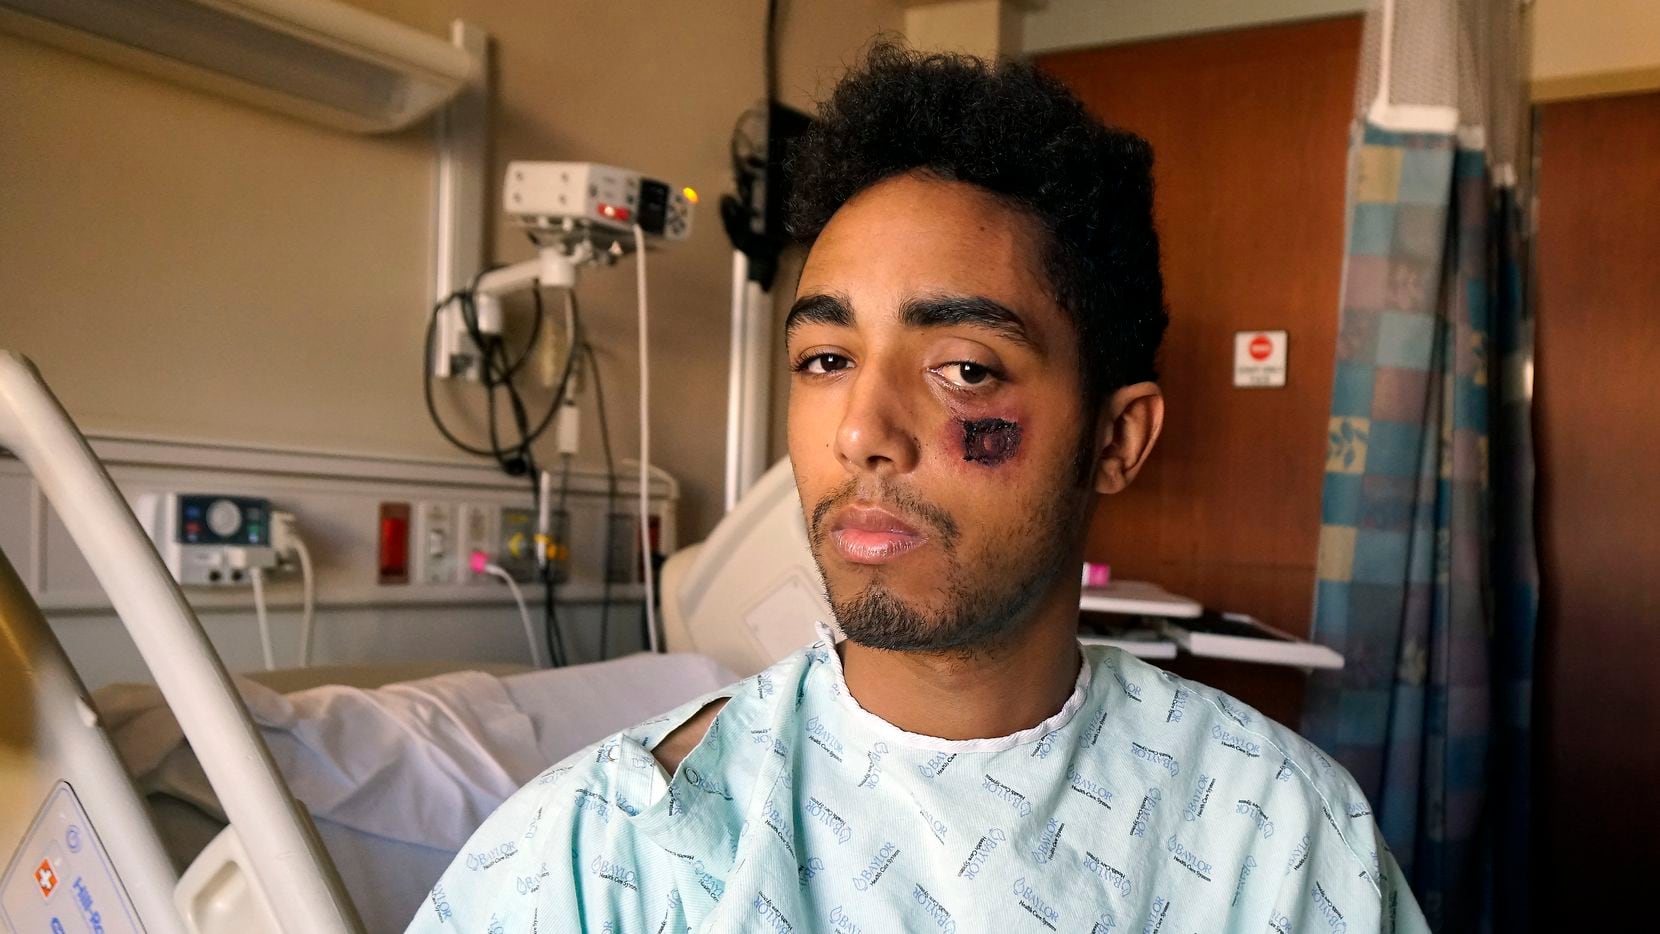 Vincent Doyle said he was struck by a so-called less lethal bullet during a May 30 protest...